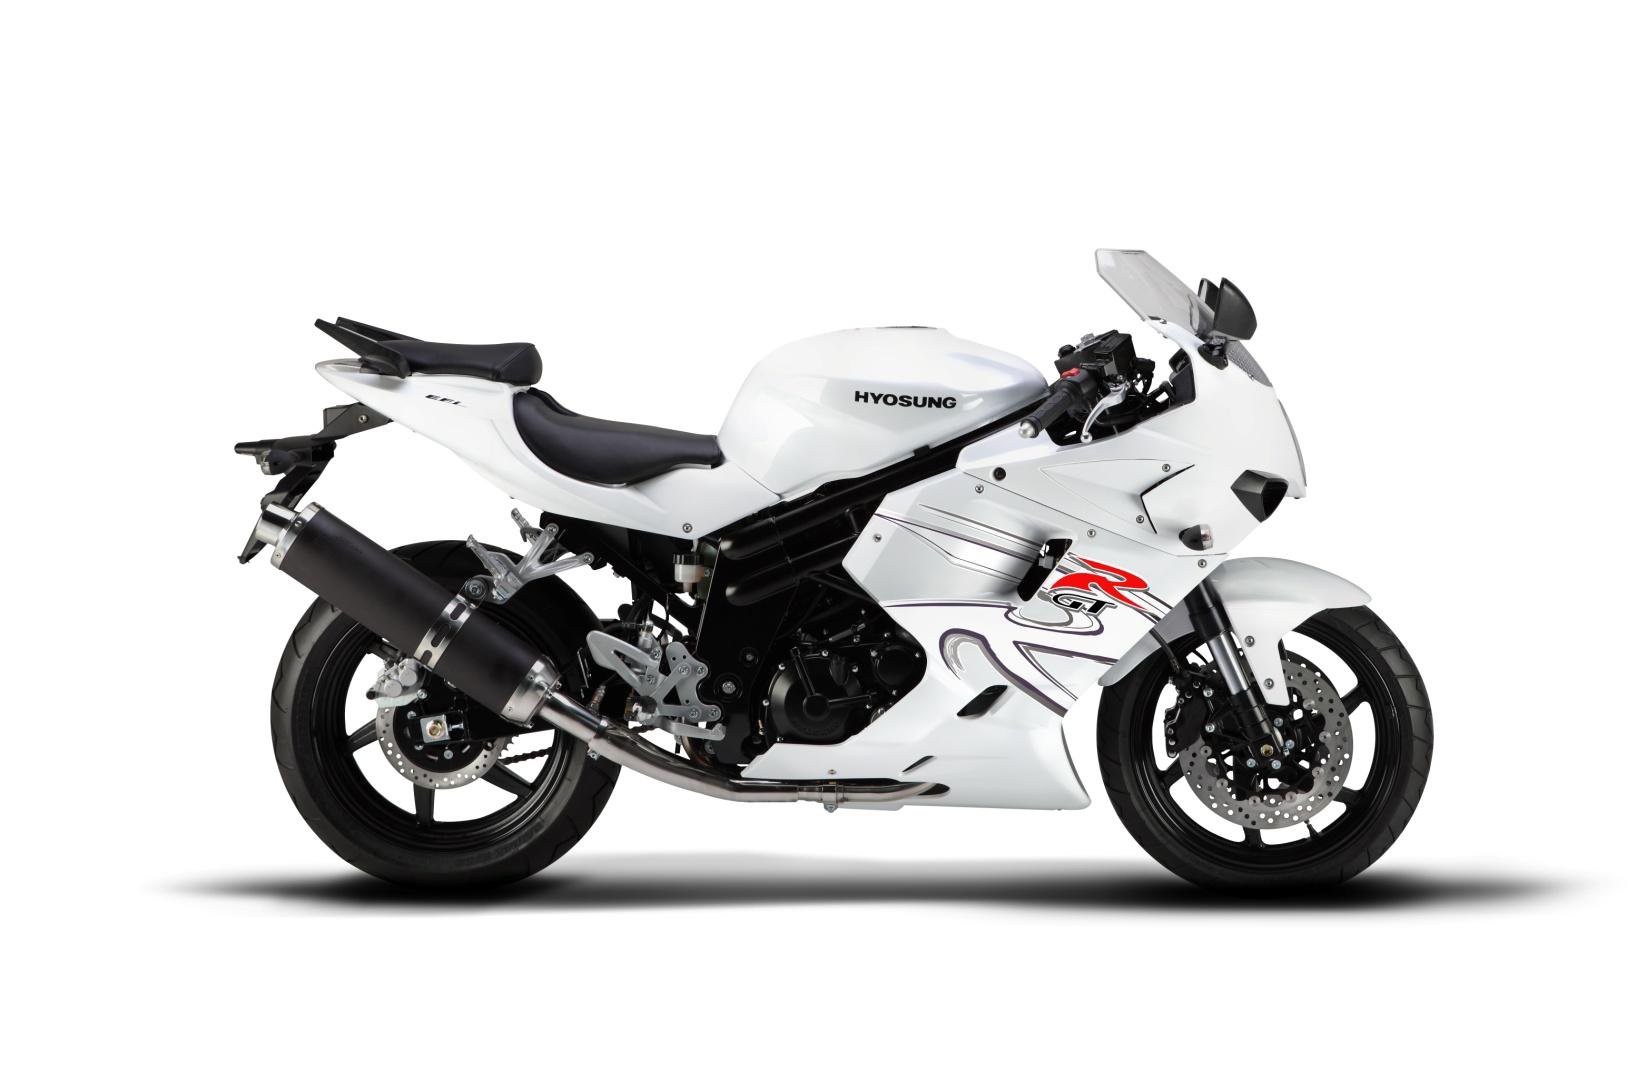 2011 Hyosung GT650R in White | OtherMakes.net